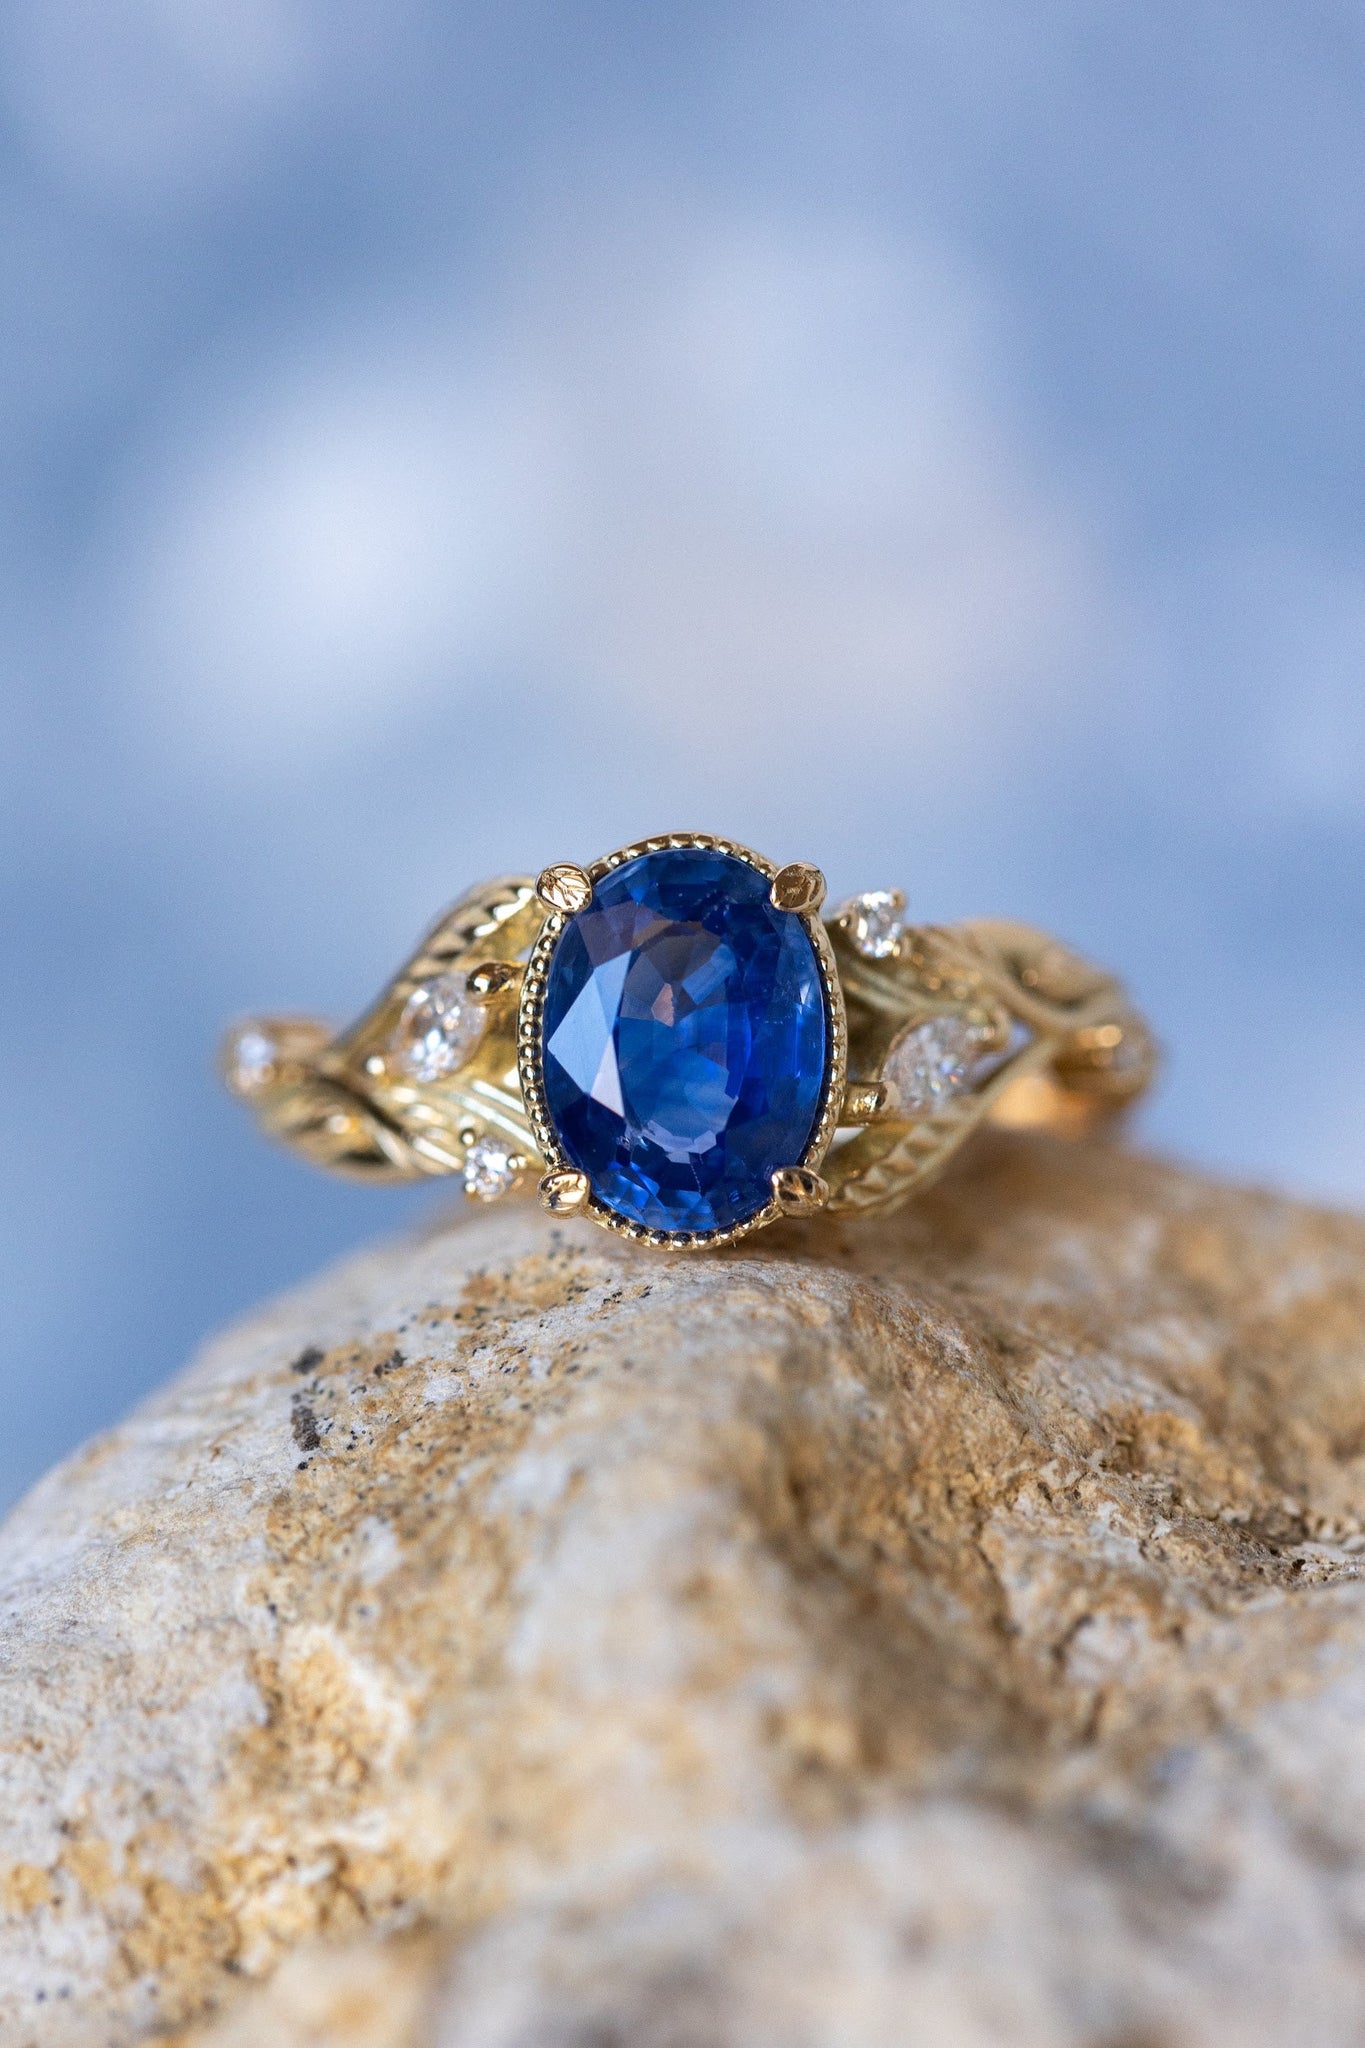 READY TO SHIP: Patricia ring in 14K rose/yellow/white gold, natural blue sapphire oval cut 8x6 mm, accent lab grown diamonds, AVAILABLE RING SIZES: 6-8US - Eden Garden Jewelry™